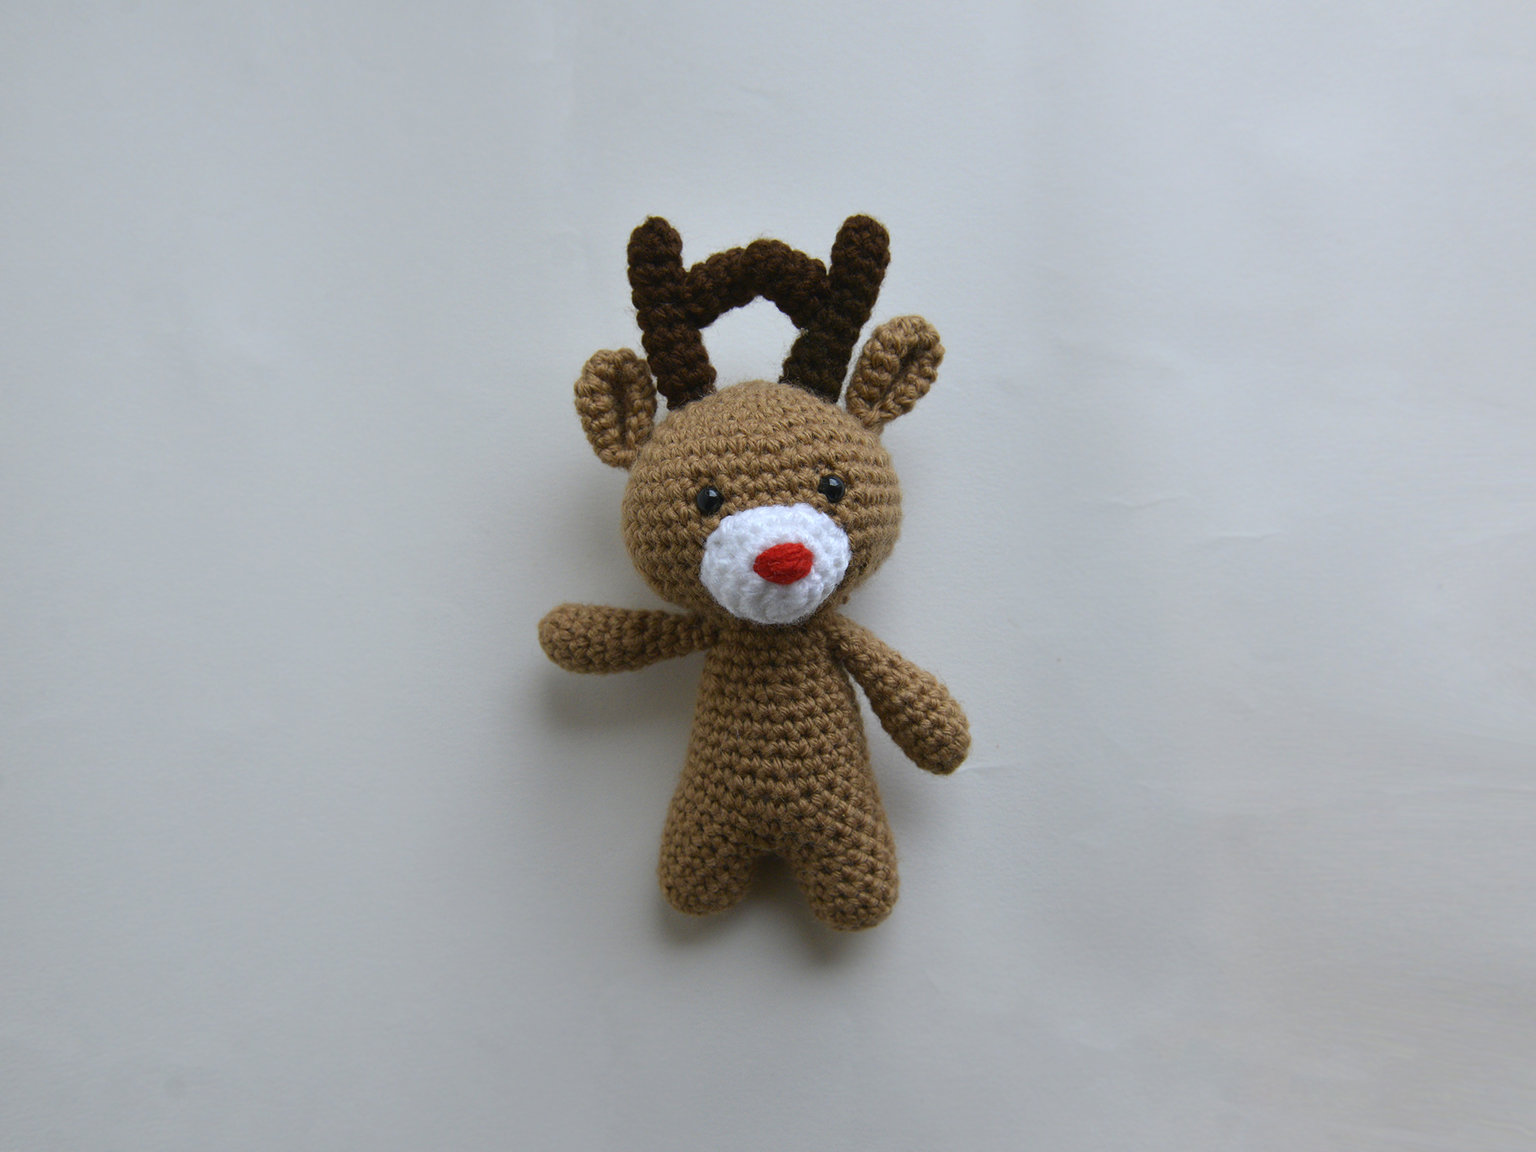 Hand-knitted reindeer